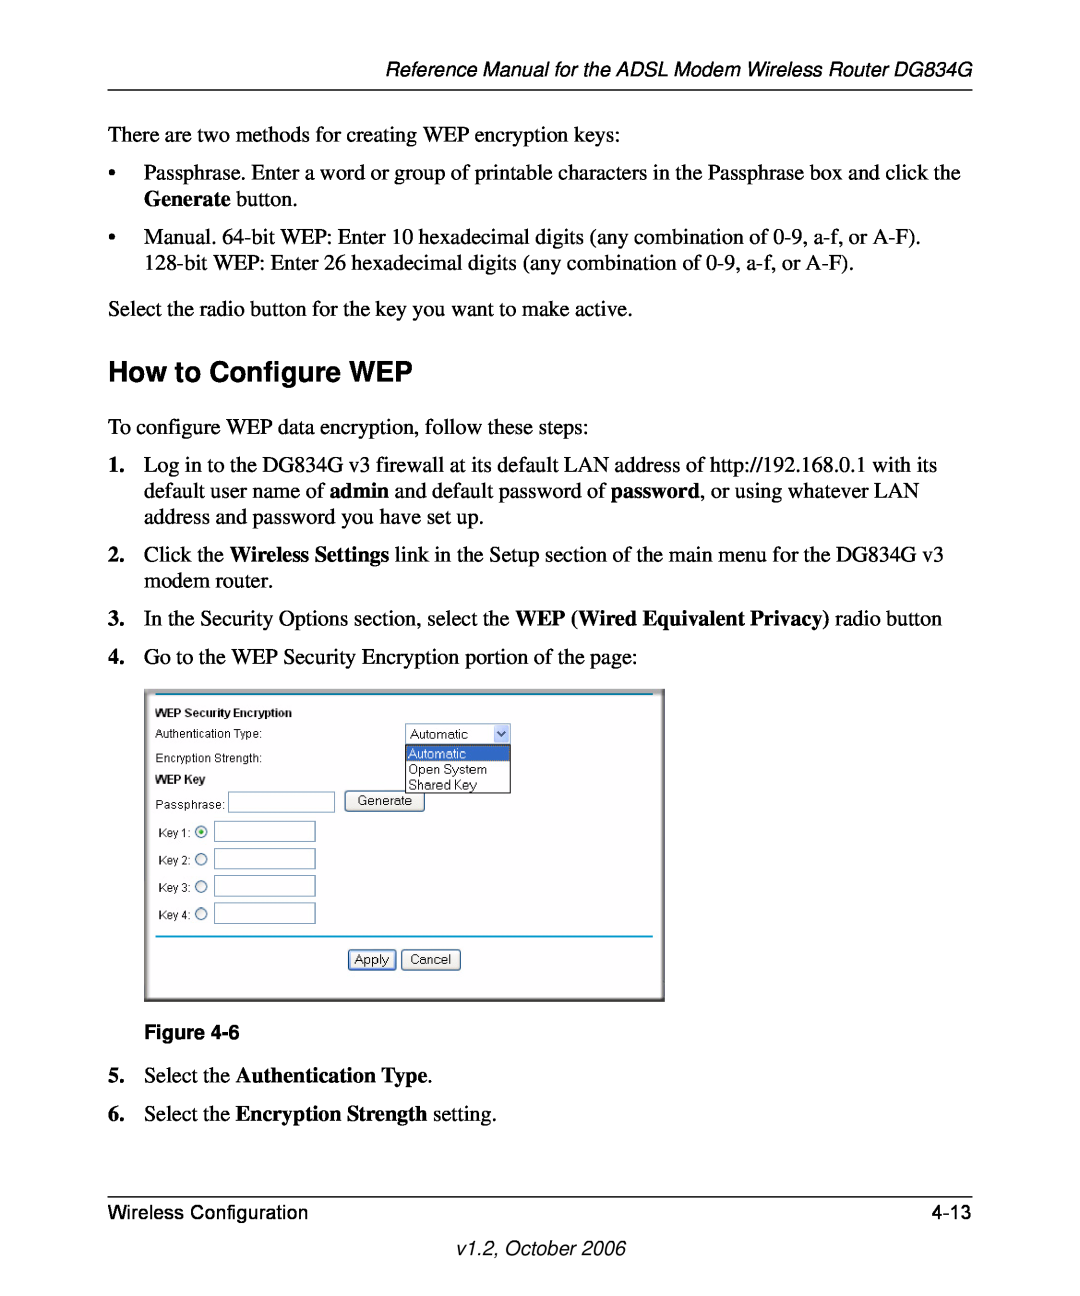 NETGEAR DG834G manual How to Configure WEP, Select the Authentication Type, Select the Encryption Strength setting 